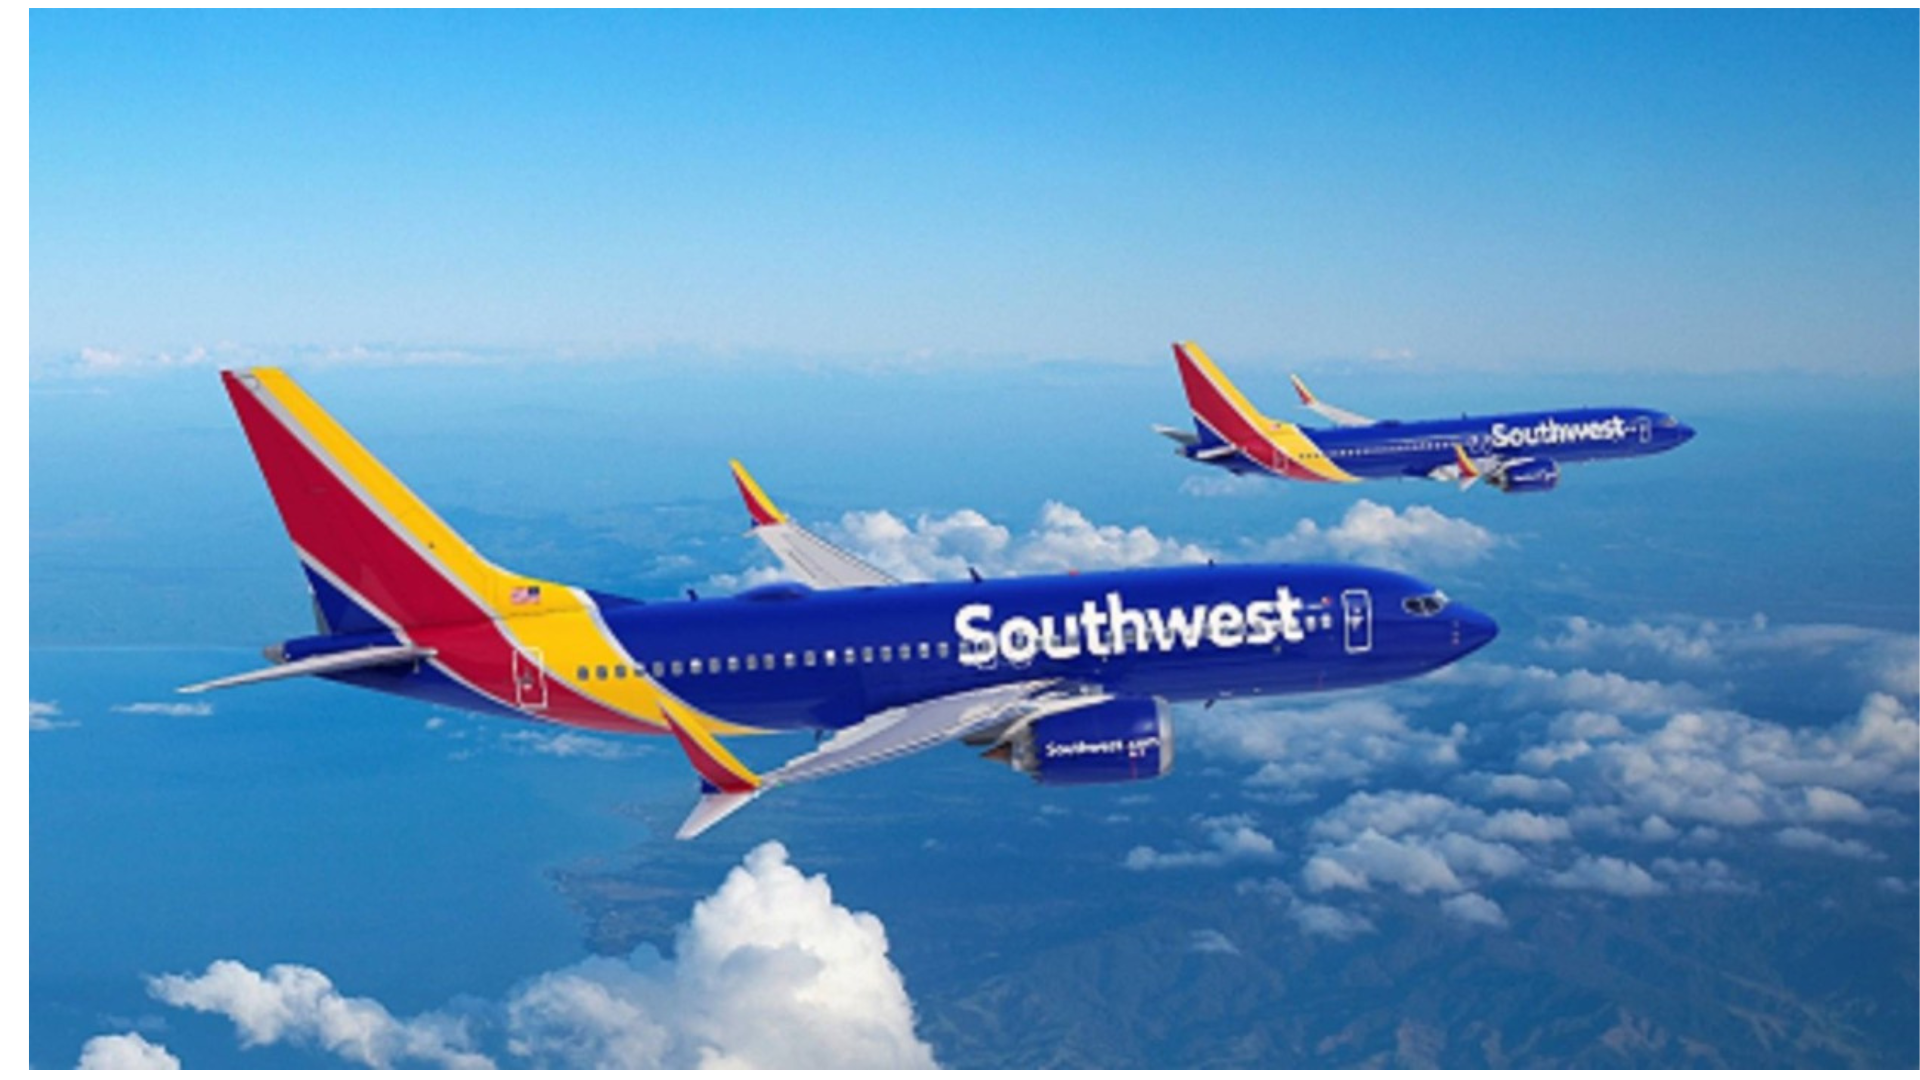 US Travel Chaos: Southwest Airlines Faces Outage, Over 1,500 Flights Delayed